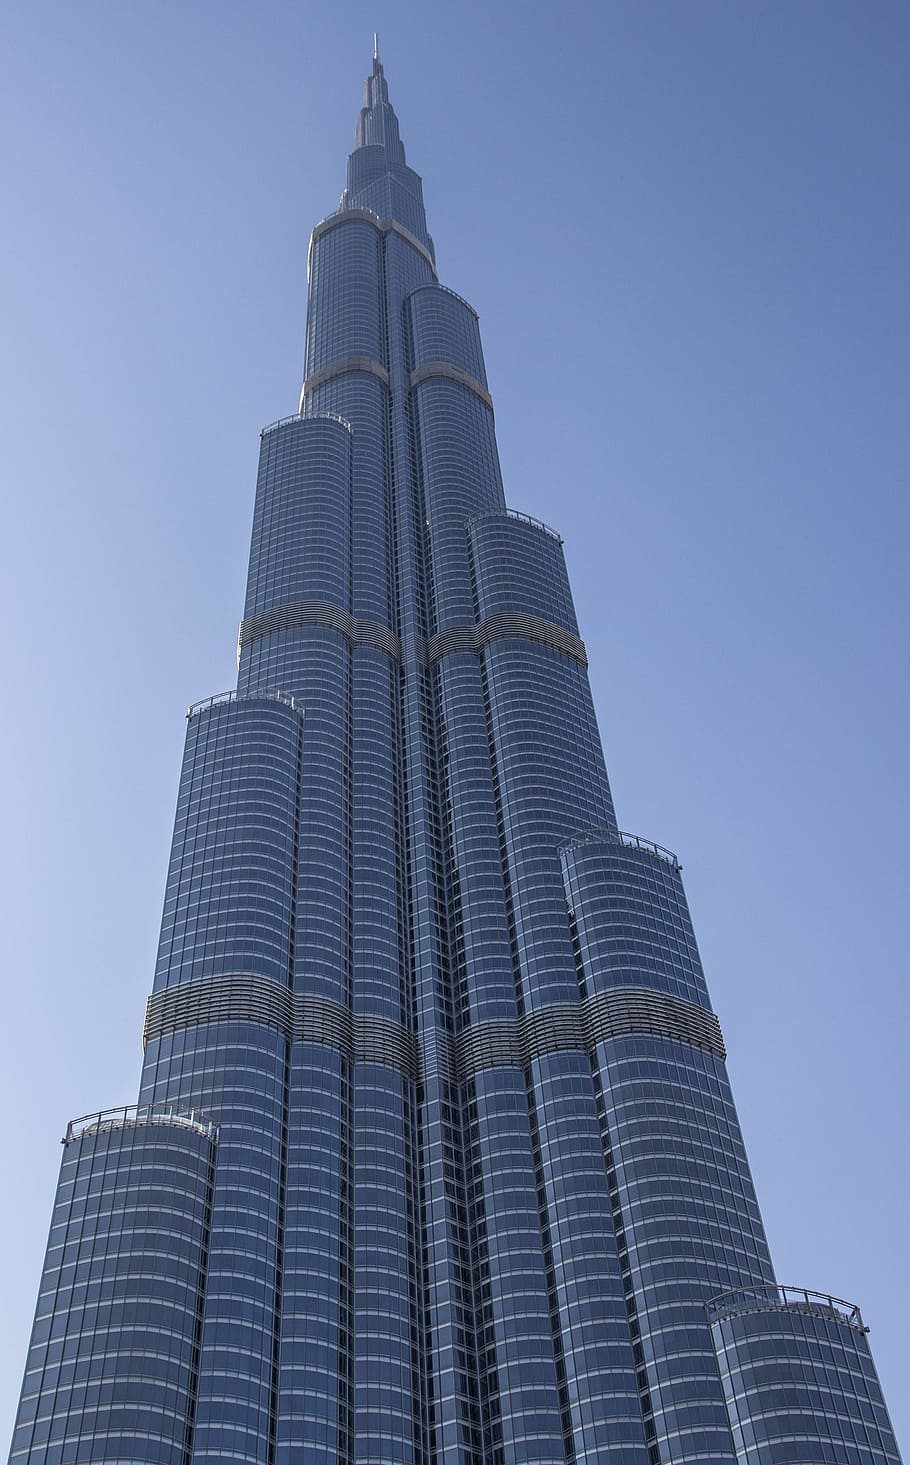 low angle view of curtain wall building at daytime, burj khalifa